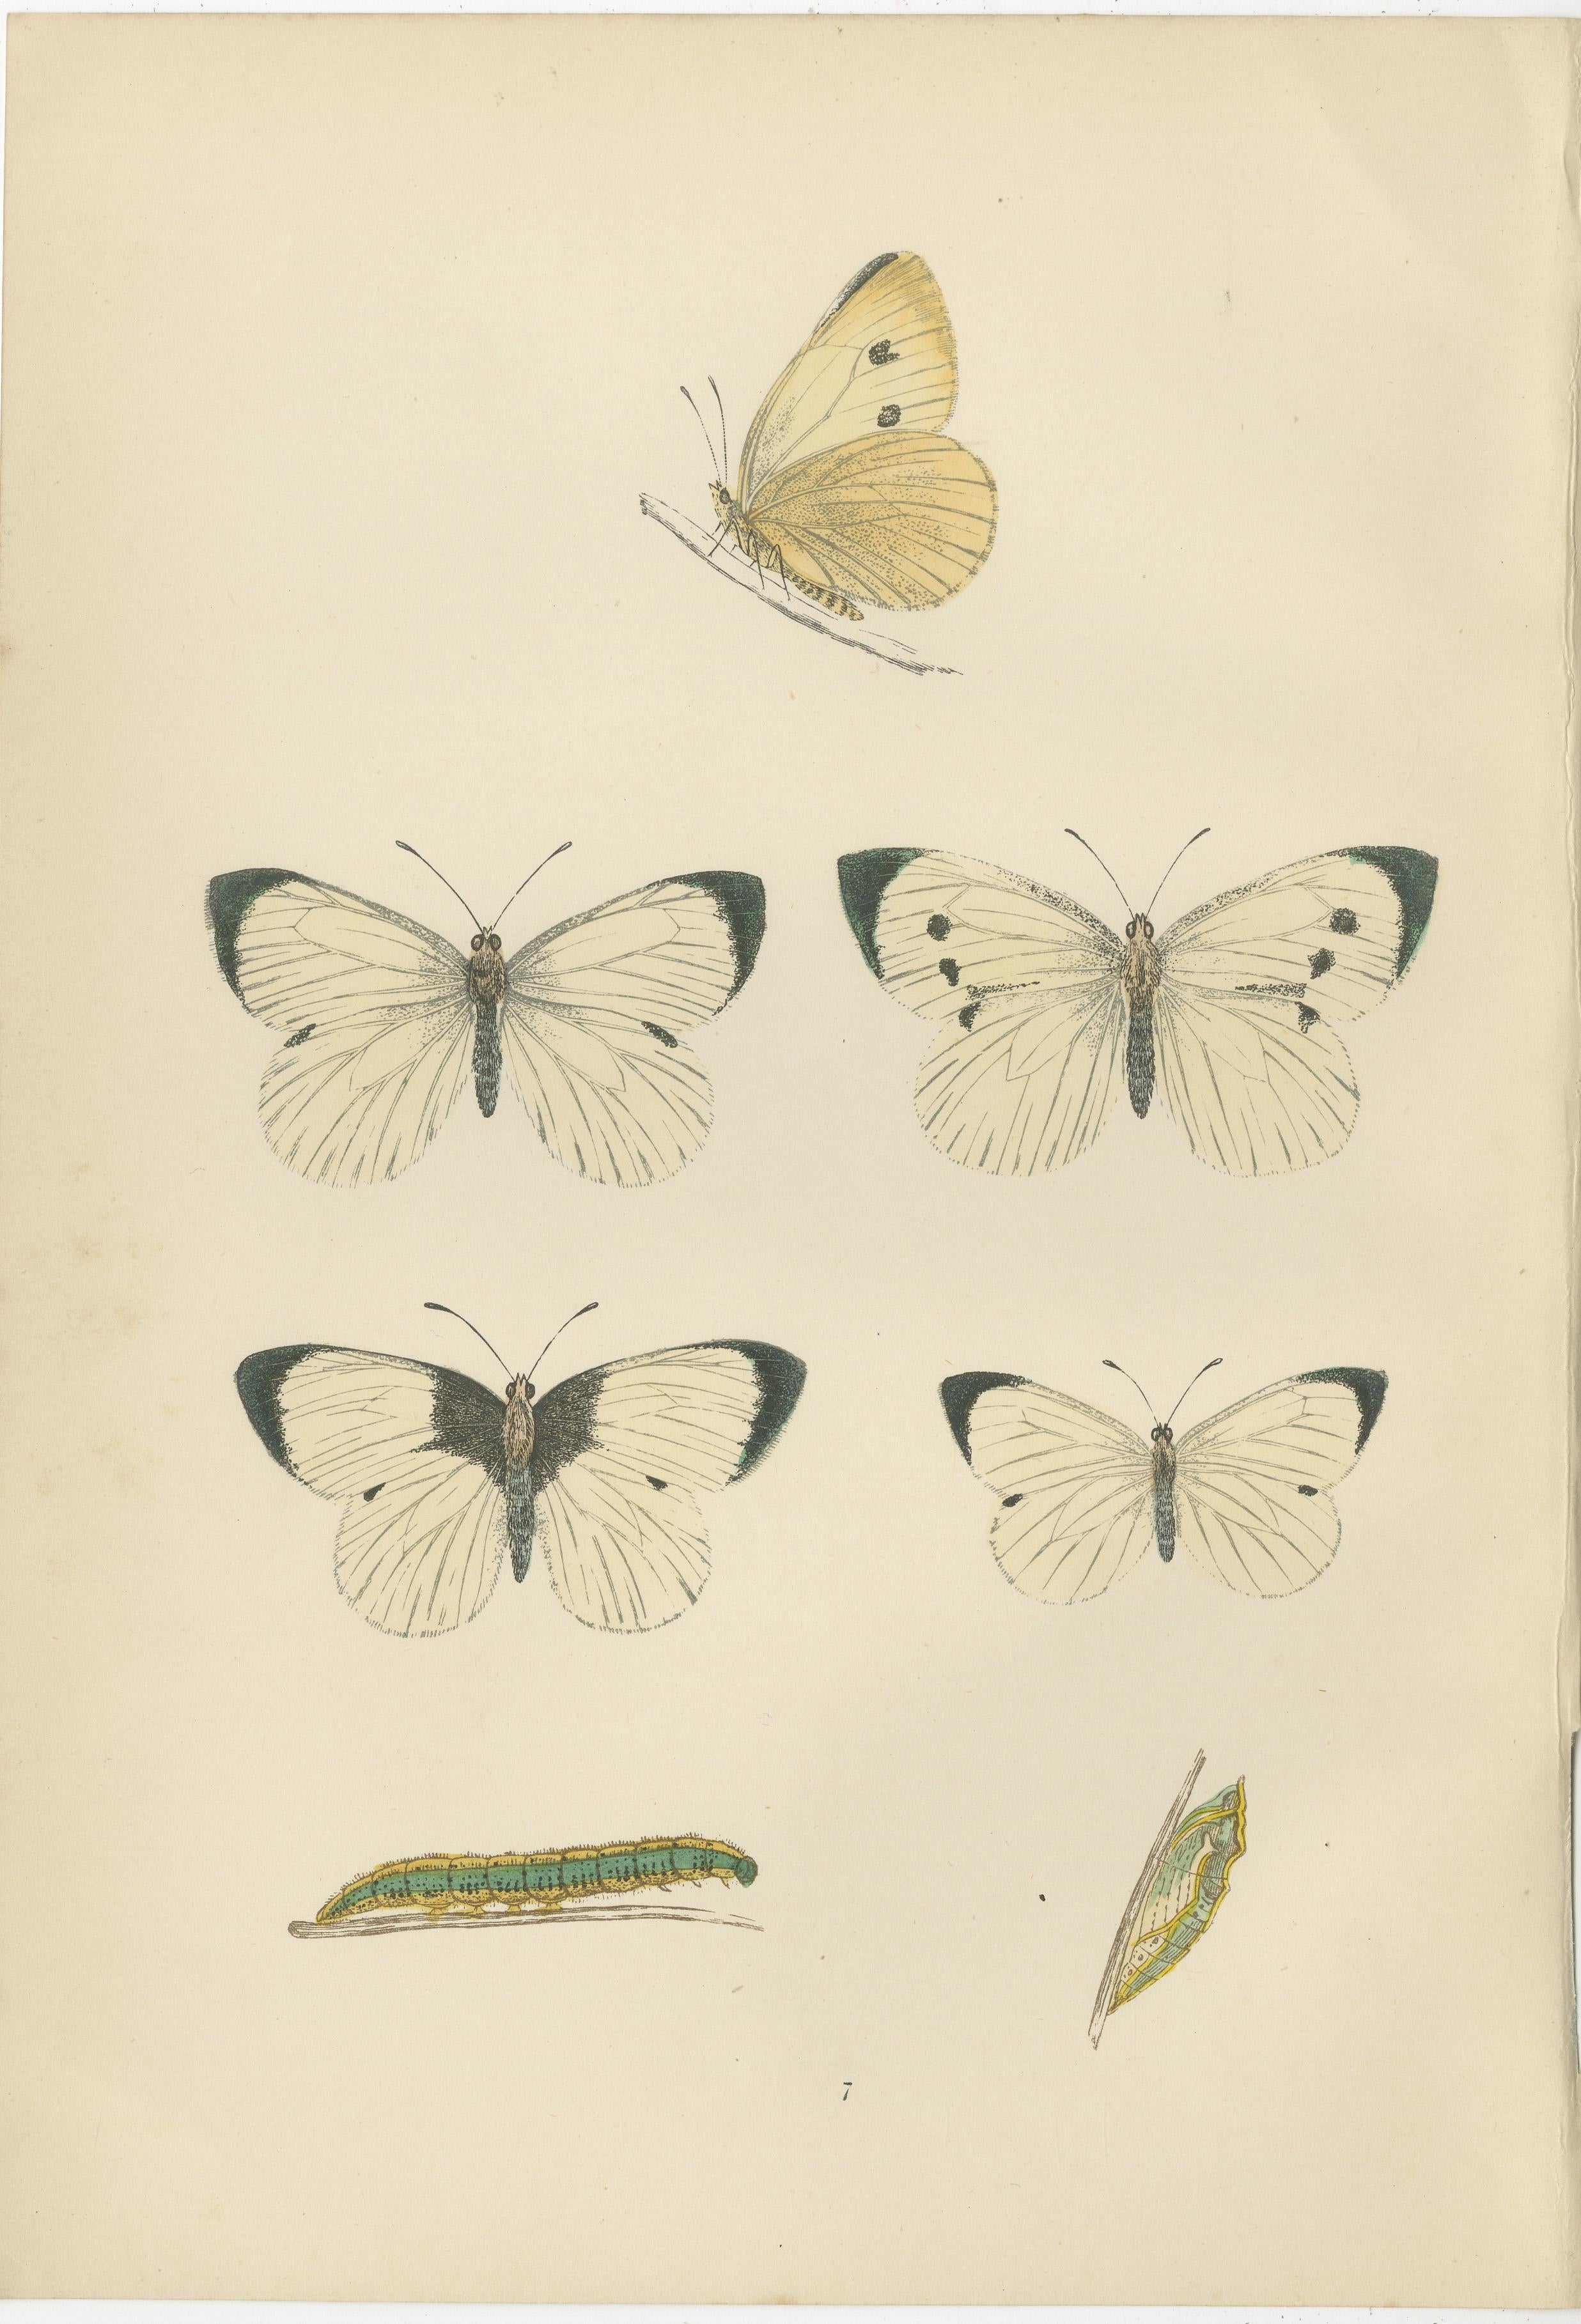 These are original plates coloured by hand from the sixth edition of the publication with title: 'A History of British Butterflies' by Morris. Published in London in 1890. .

These illustrations depict three distinct species of British butterflies,